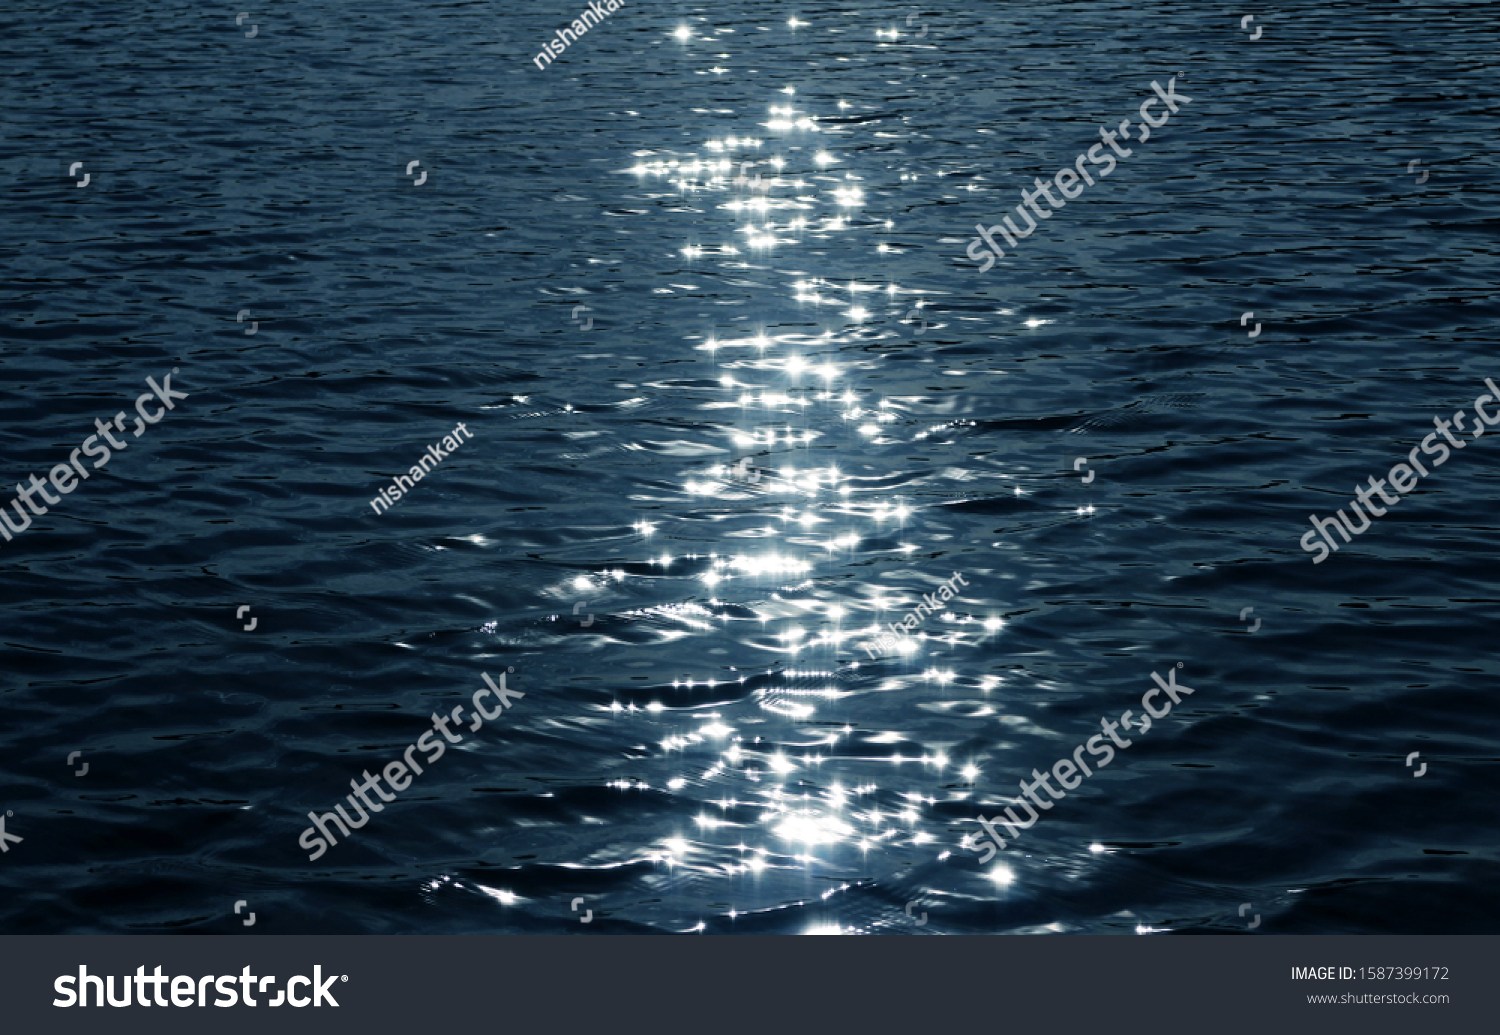 Sea texture. sunlight twinkling and reflecting off lake water. water glistening from the sunlight hitting the water, with ripples and light rays bouncing off the surface, hope, faith and happiness #1587399172